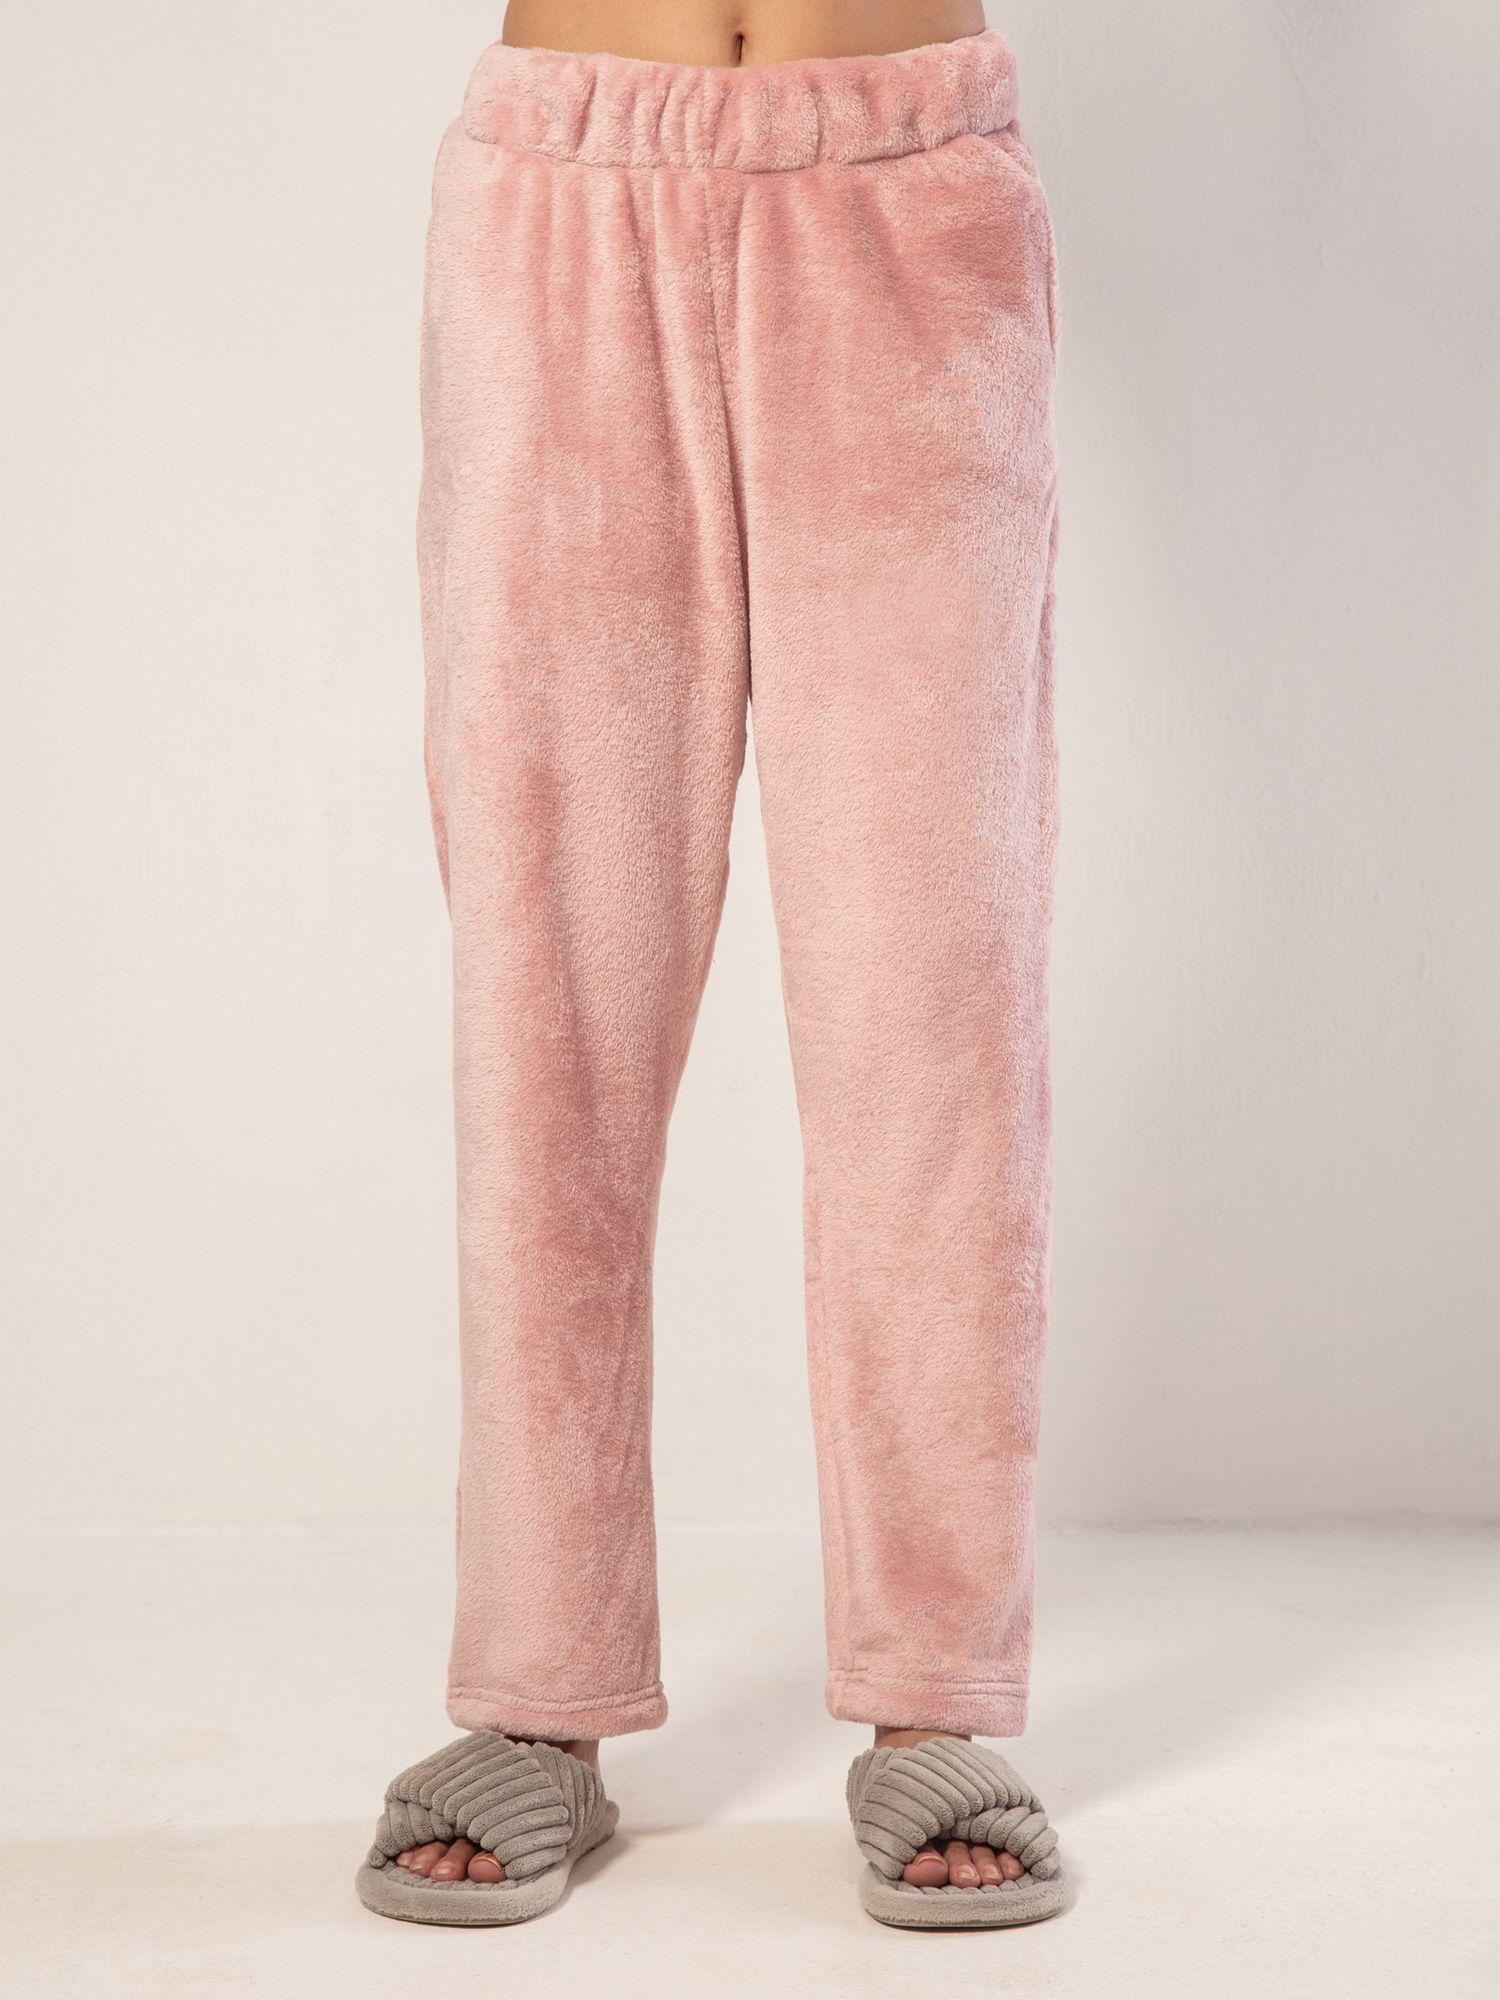 luxe-fur-lounge-pants--peach-whip-nys121